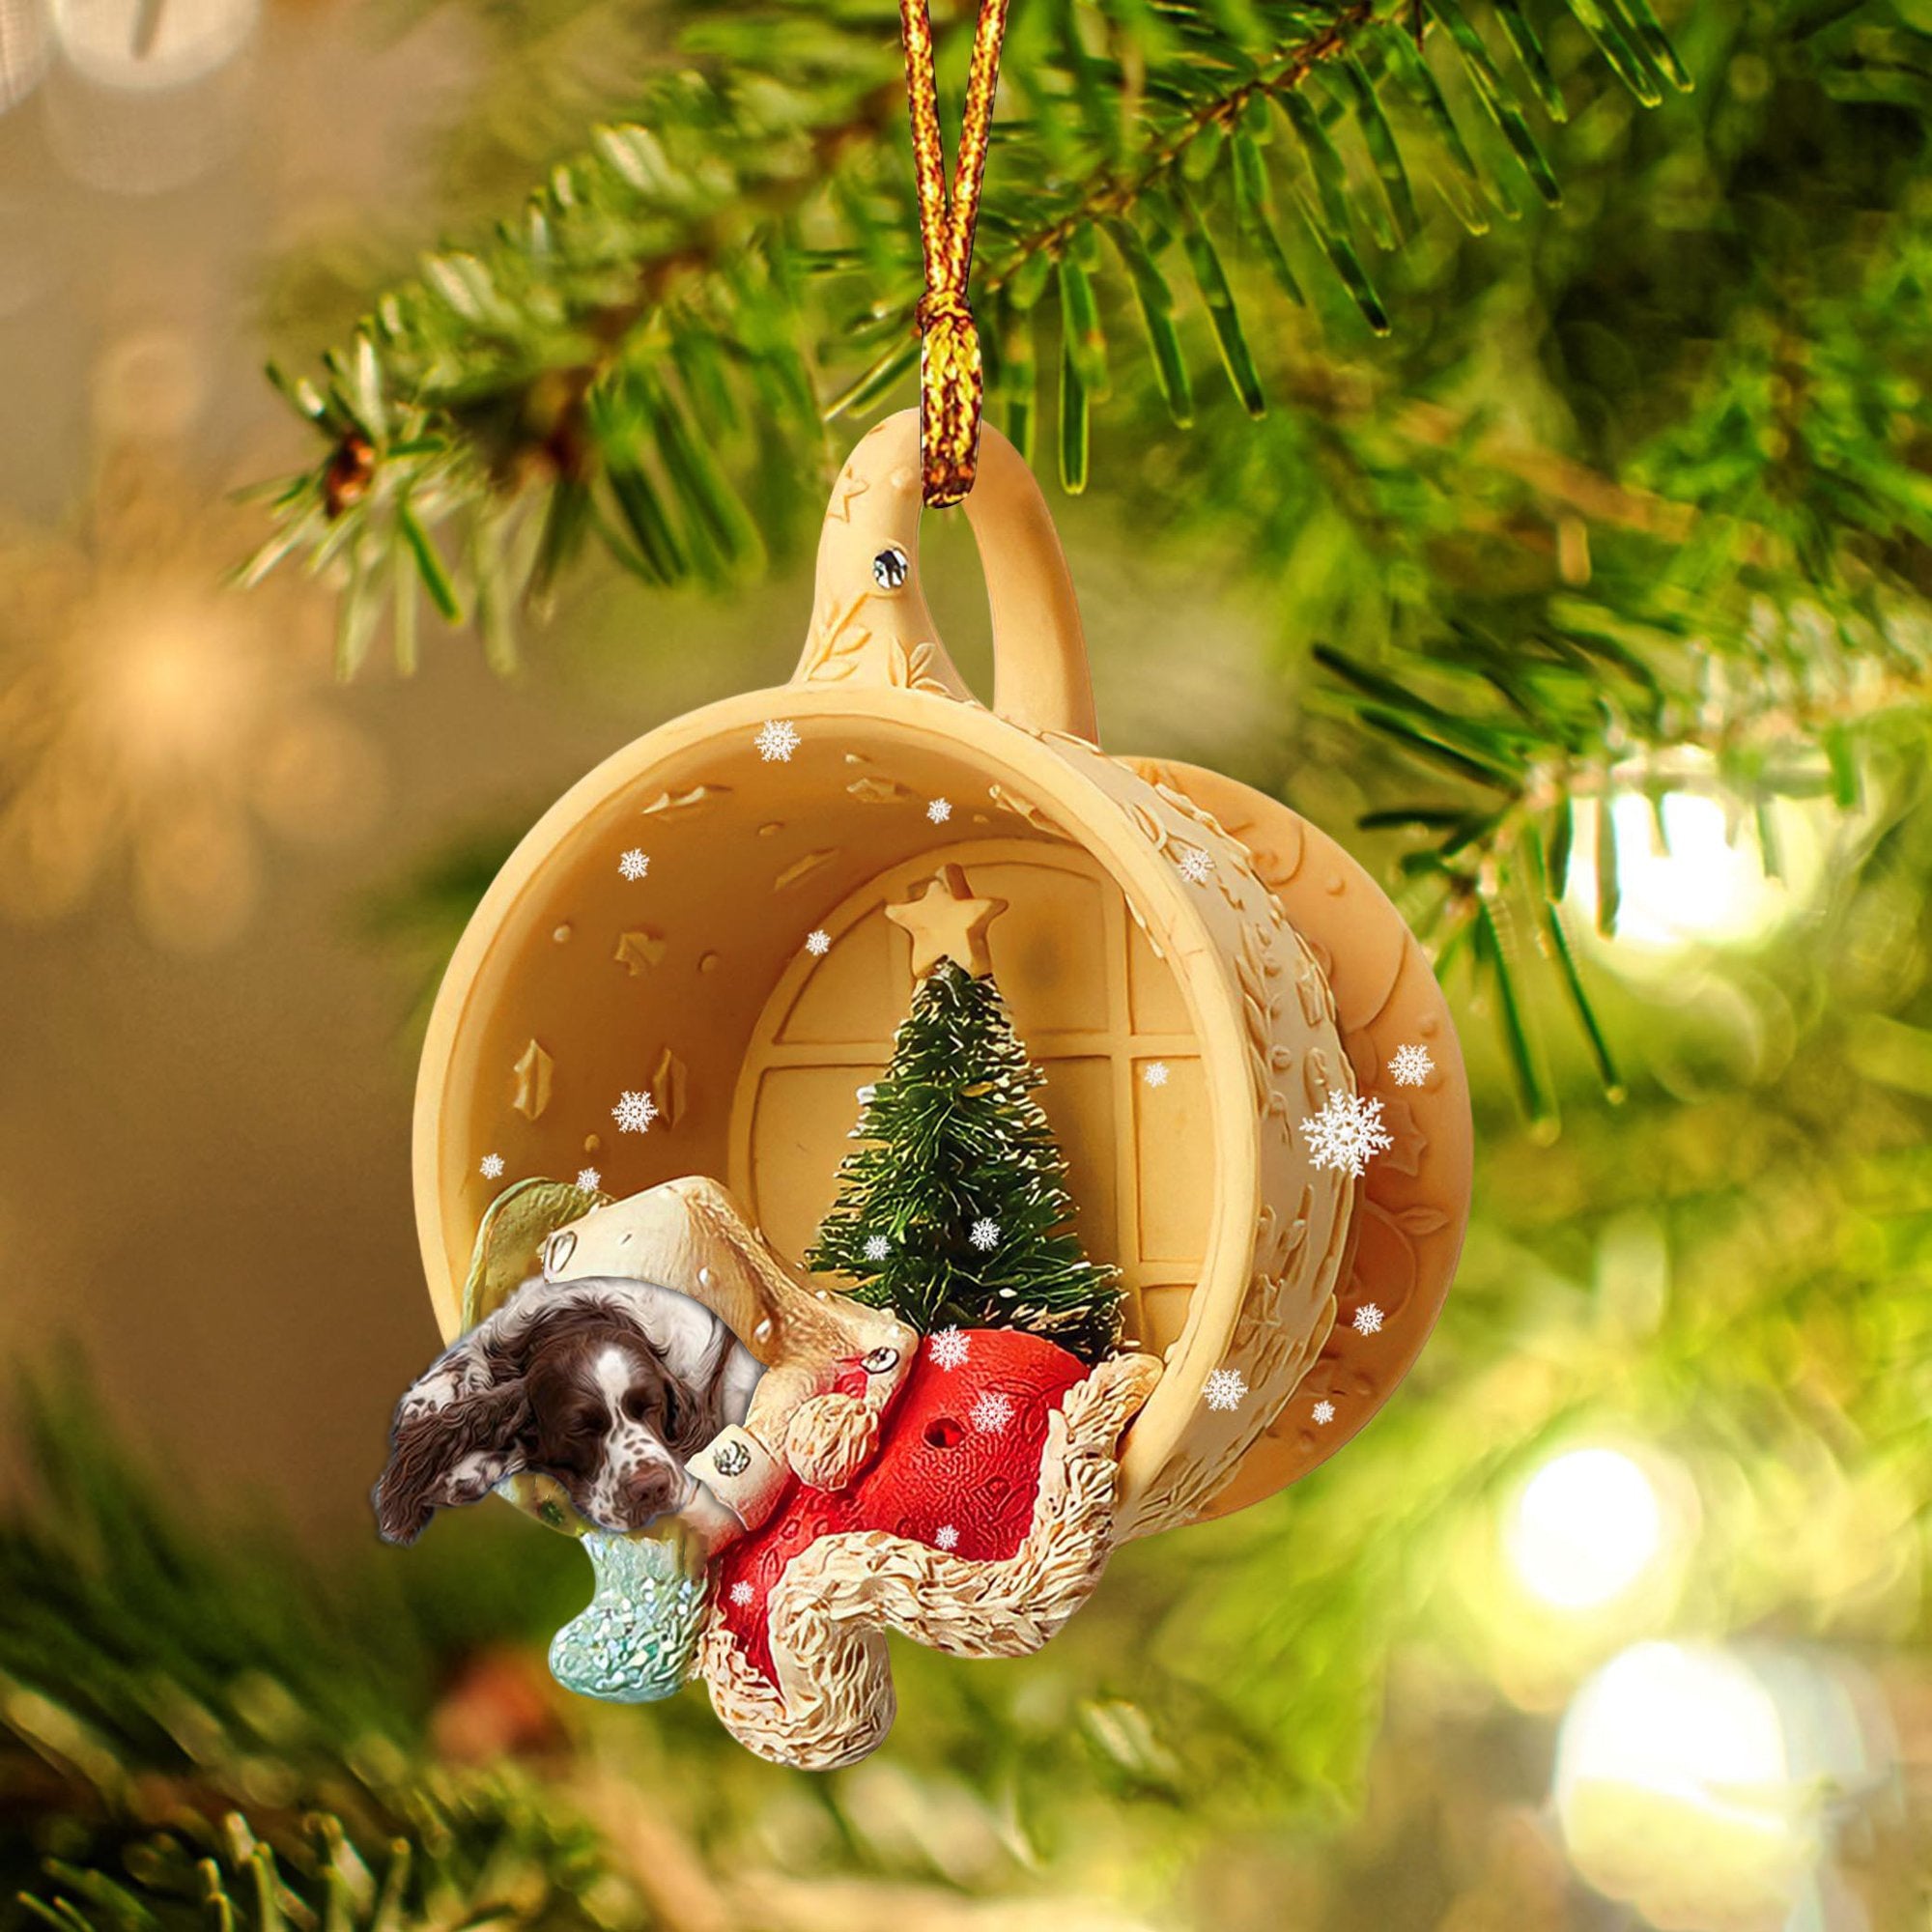 English Springer Spaniel Sleeping In A Cup Christmas Ornament